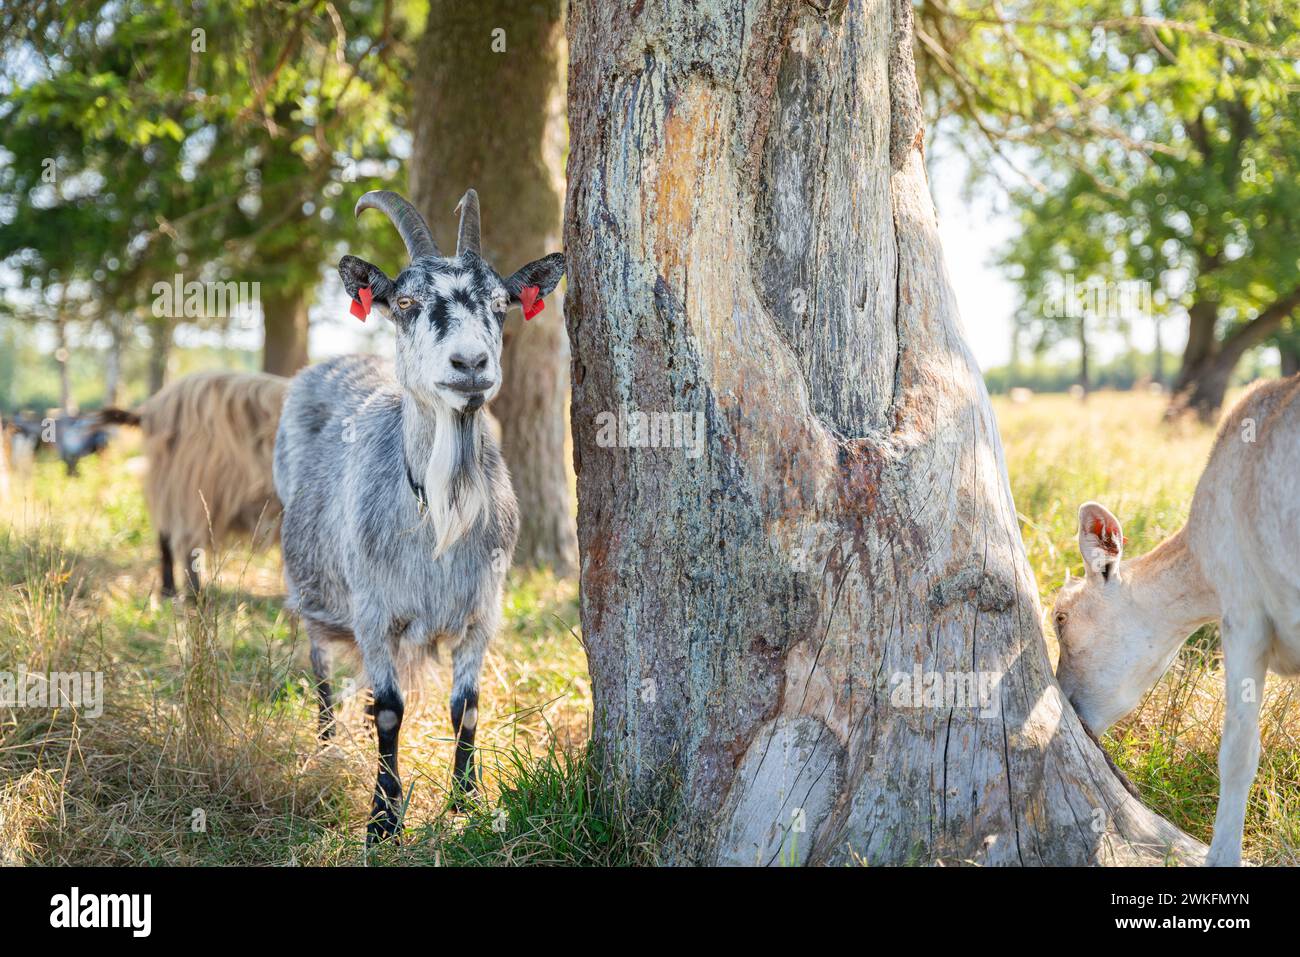 Domestic goat (Capra hircus) standing in the shade of tree. Domestic goats in the shade of trees on a hot summer day. Stock Photo